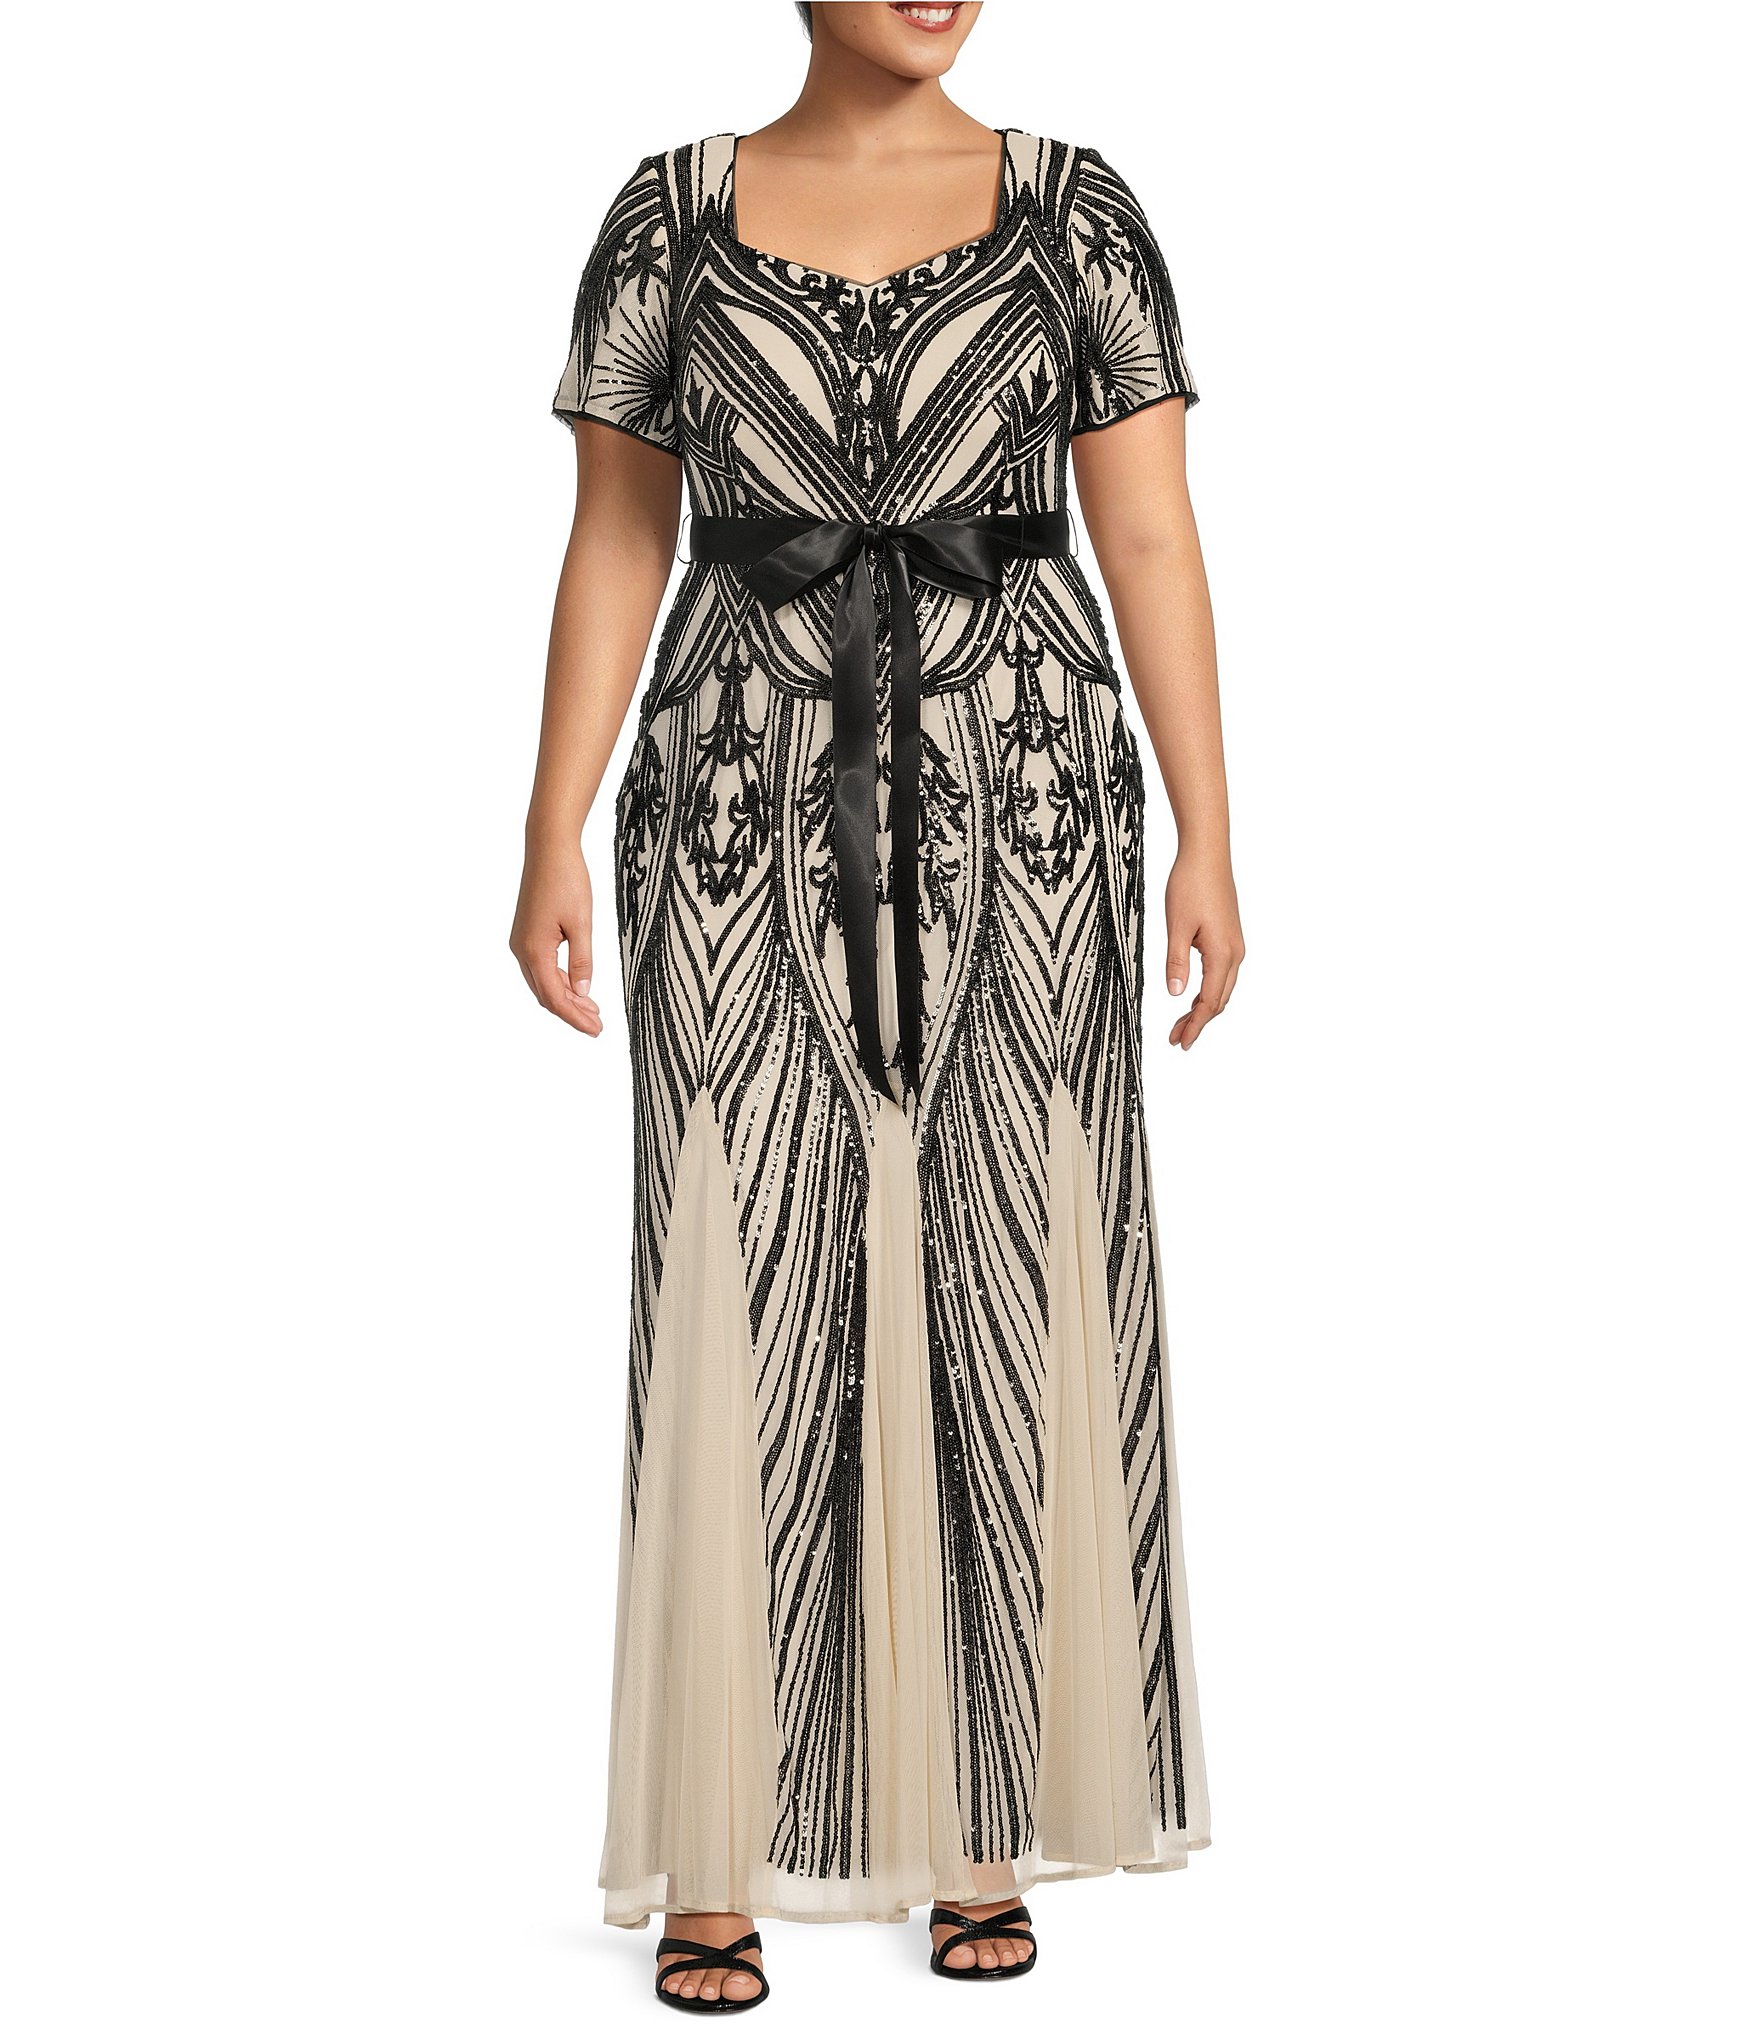 R&M Richards Plus Size Women's Short Sleeve Sequin-Embellished Evening Gown